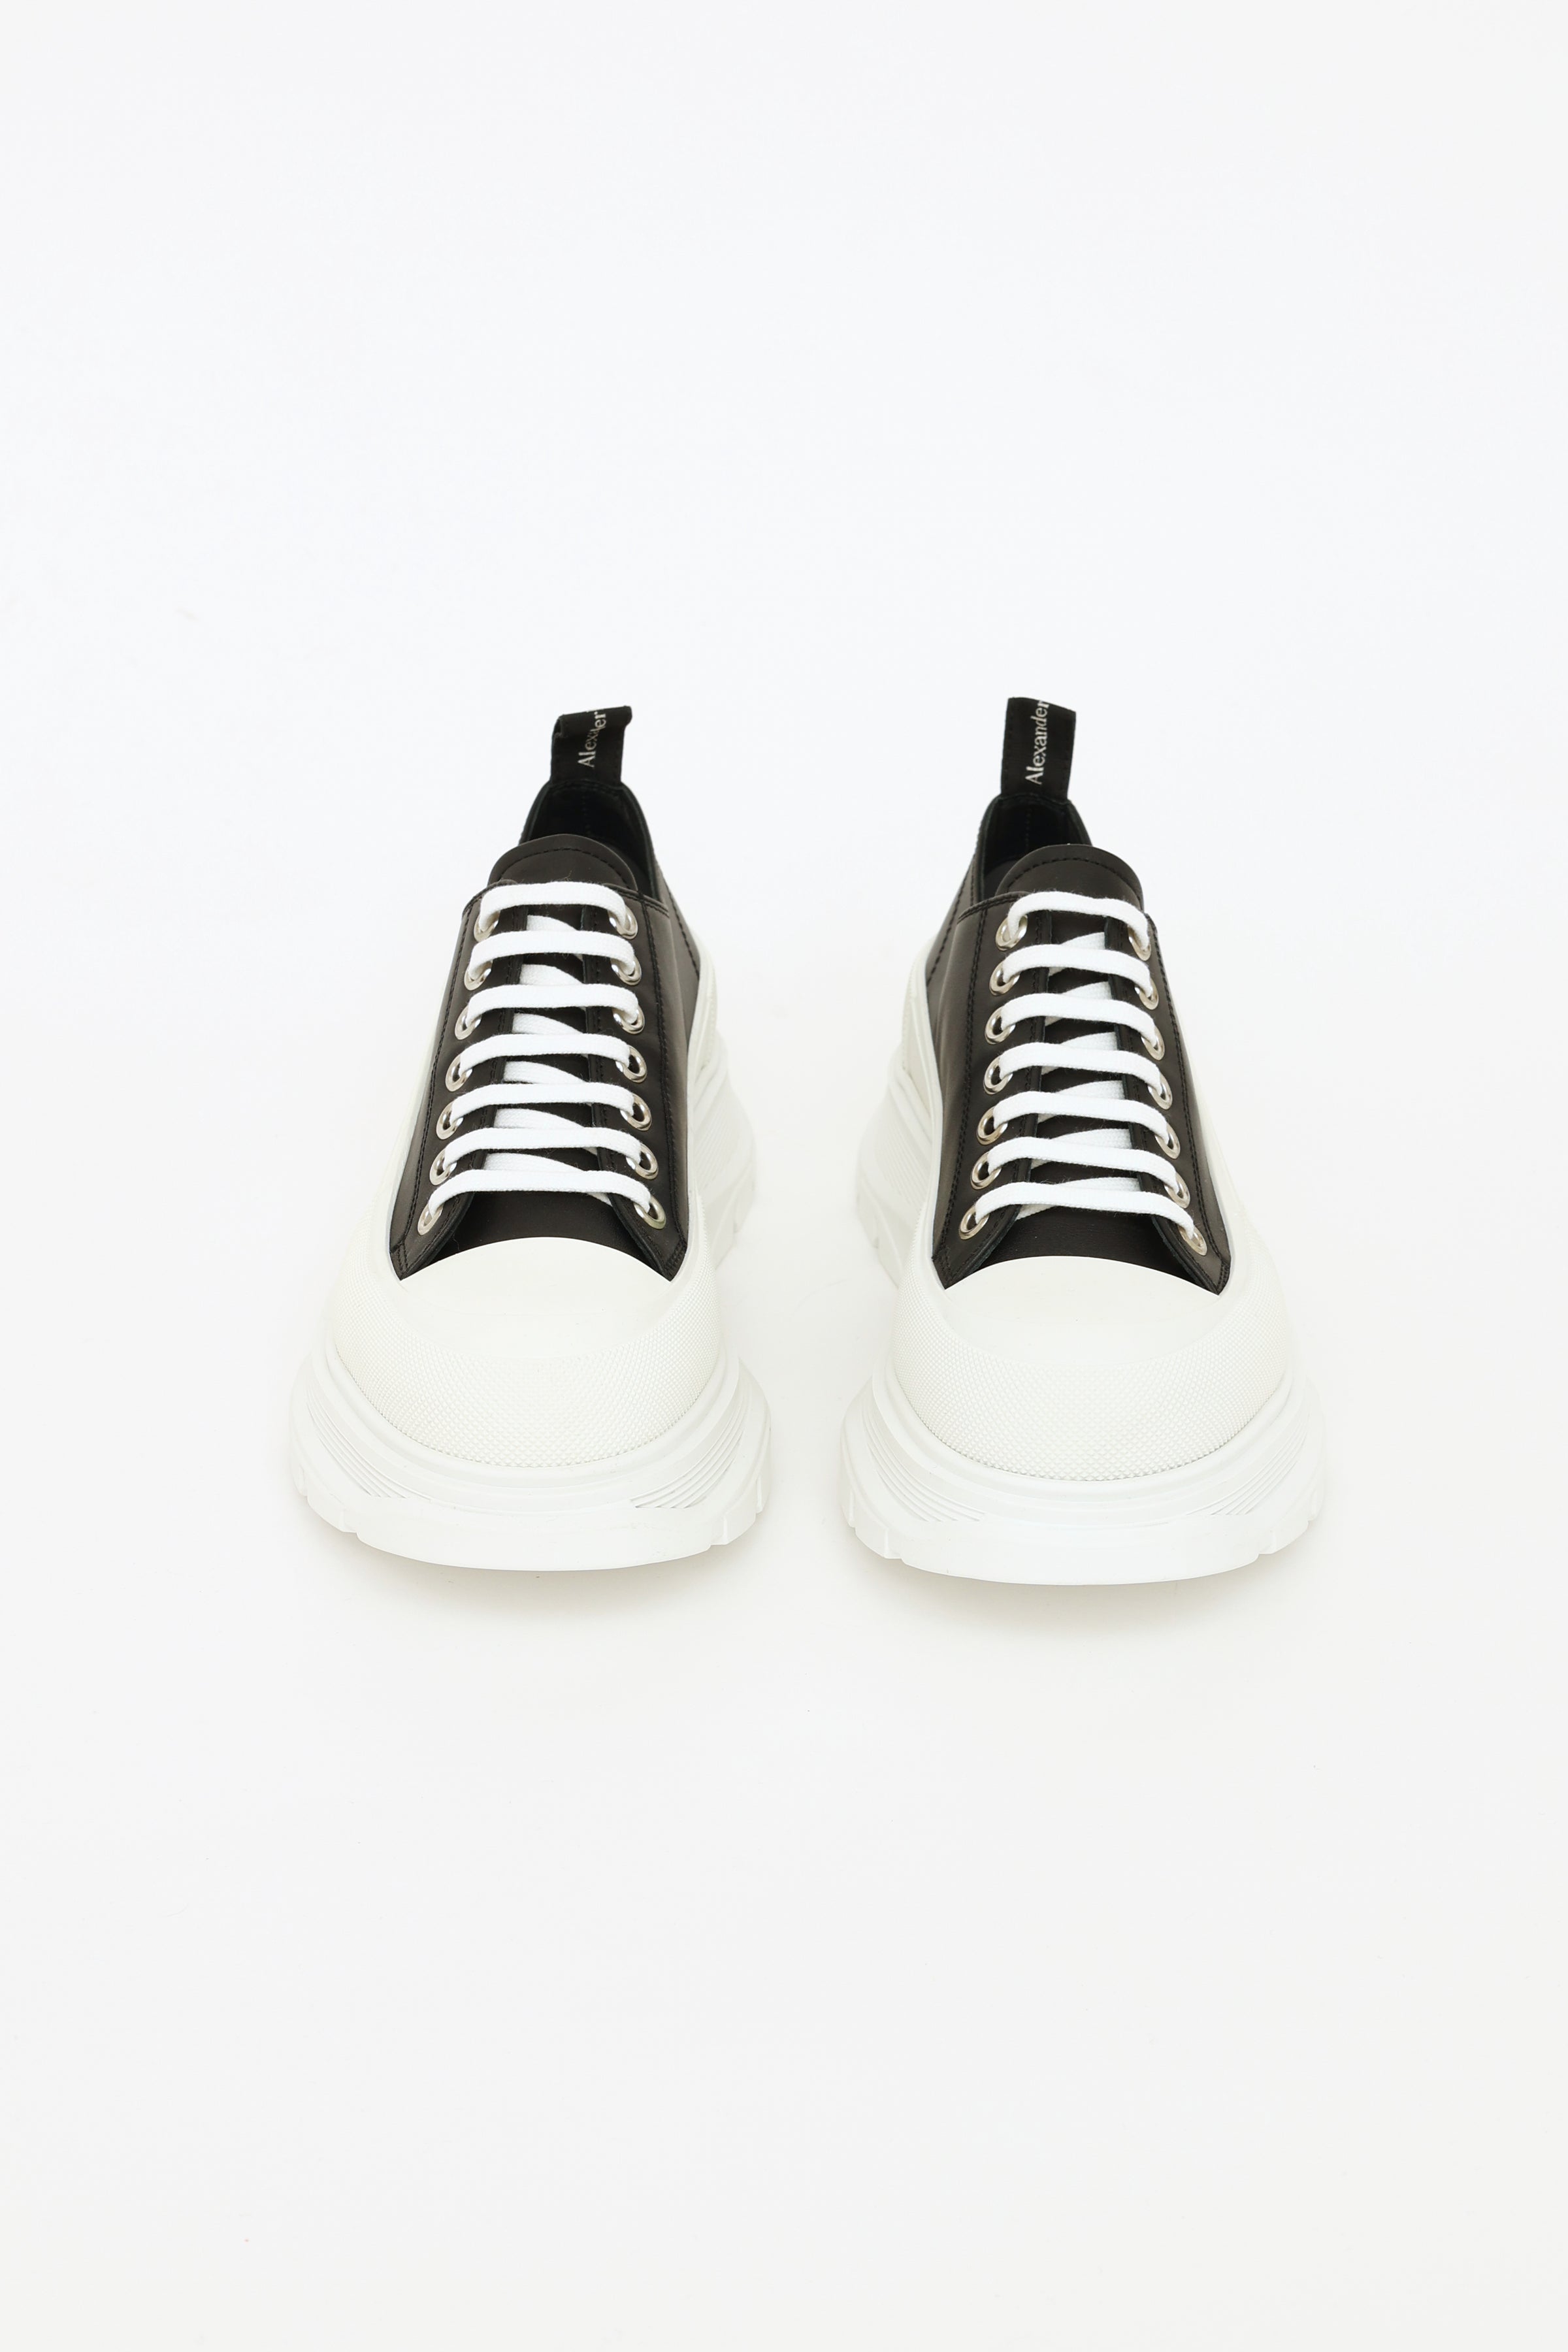 ALEXANDER MCQUEEN: Larry leather sneakers with metal eyelets - Black | Alexander  McQueen sneakers 734614WIAHU online at GIGLIO.COM